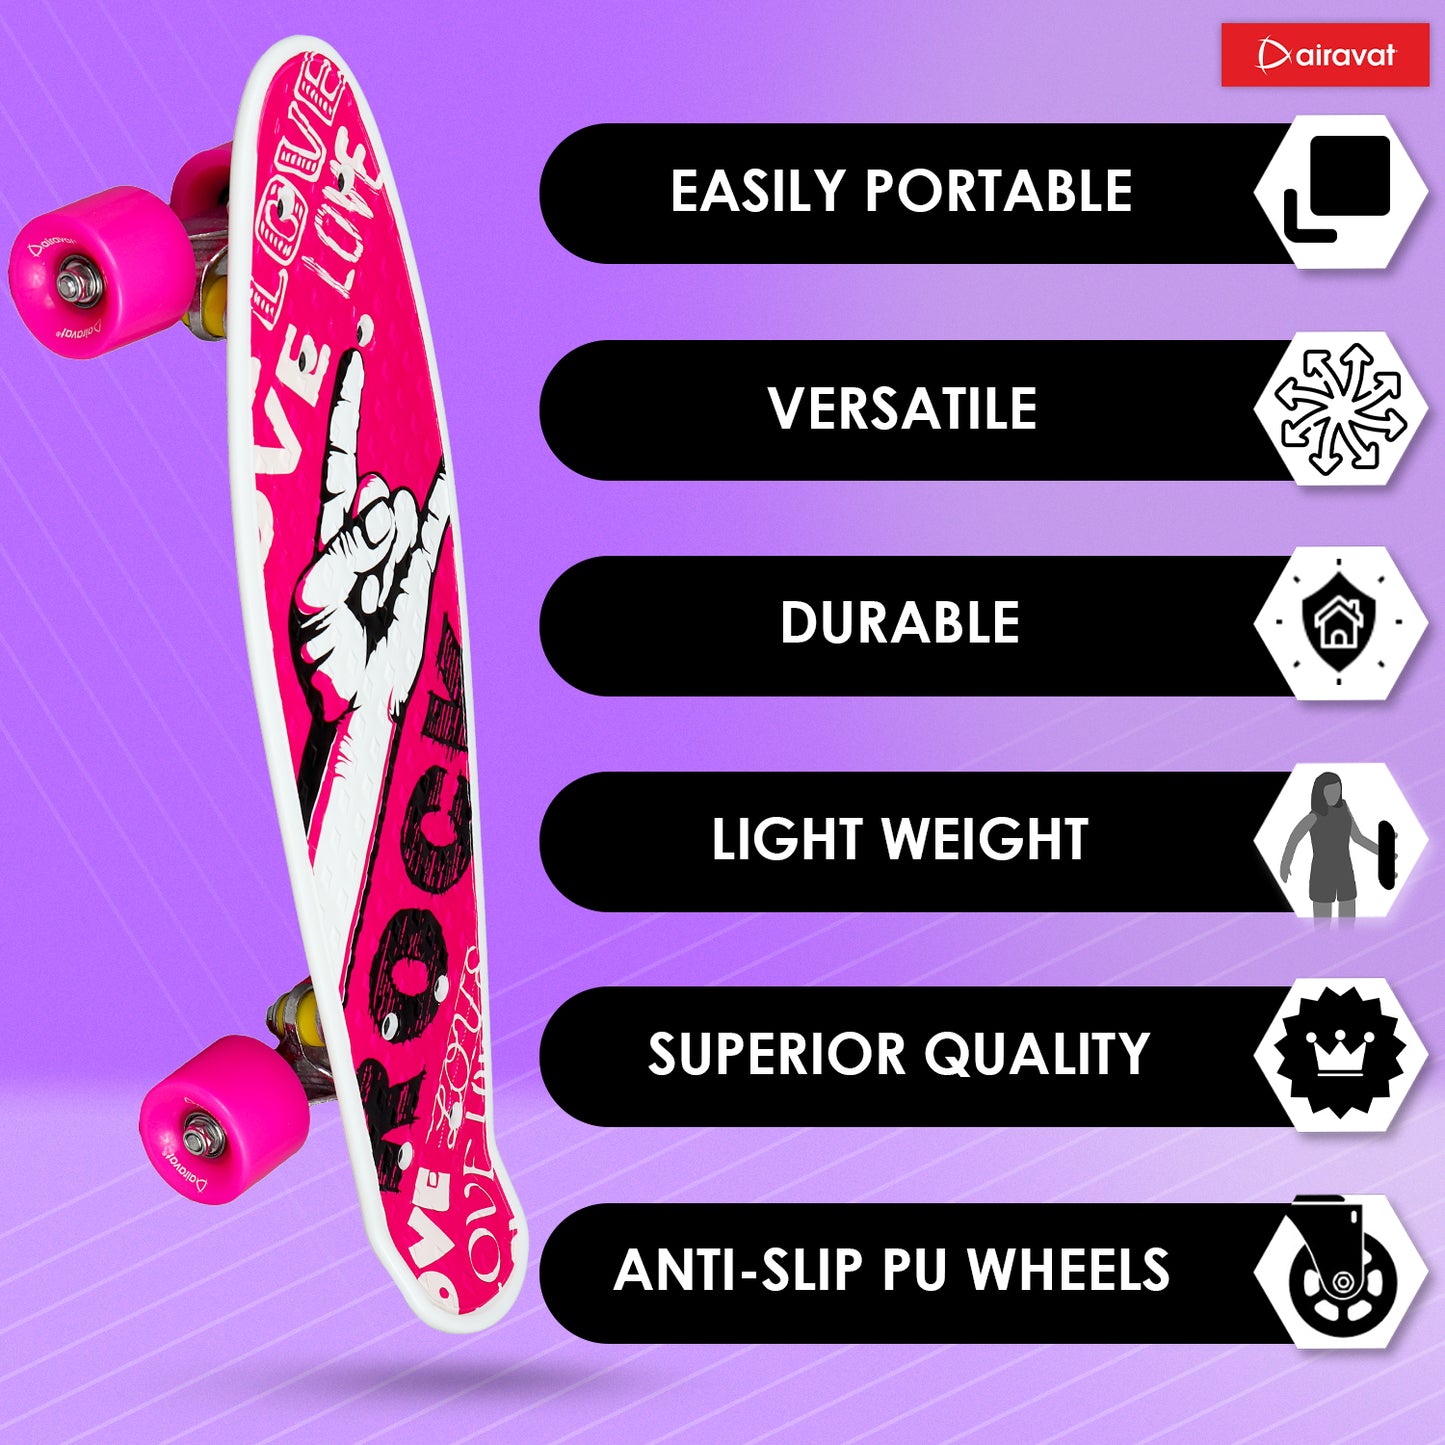 7811-skateboard-style-2-more-features